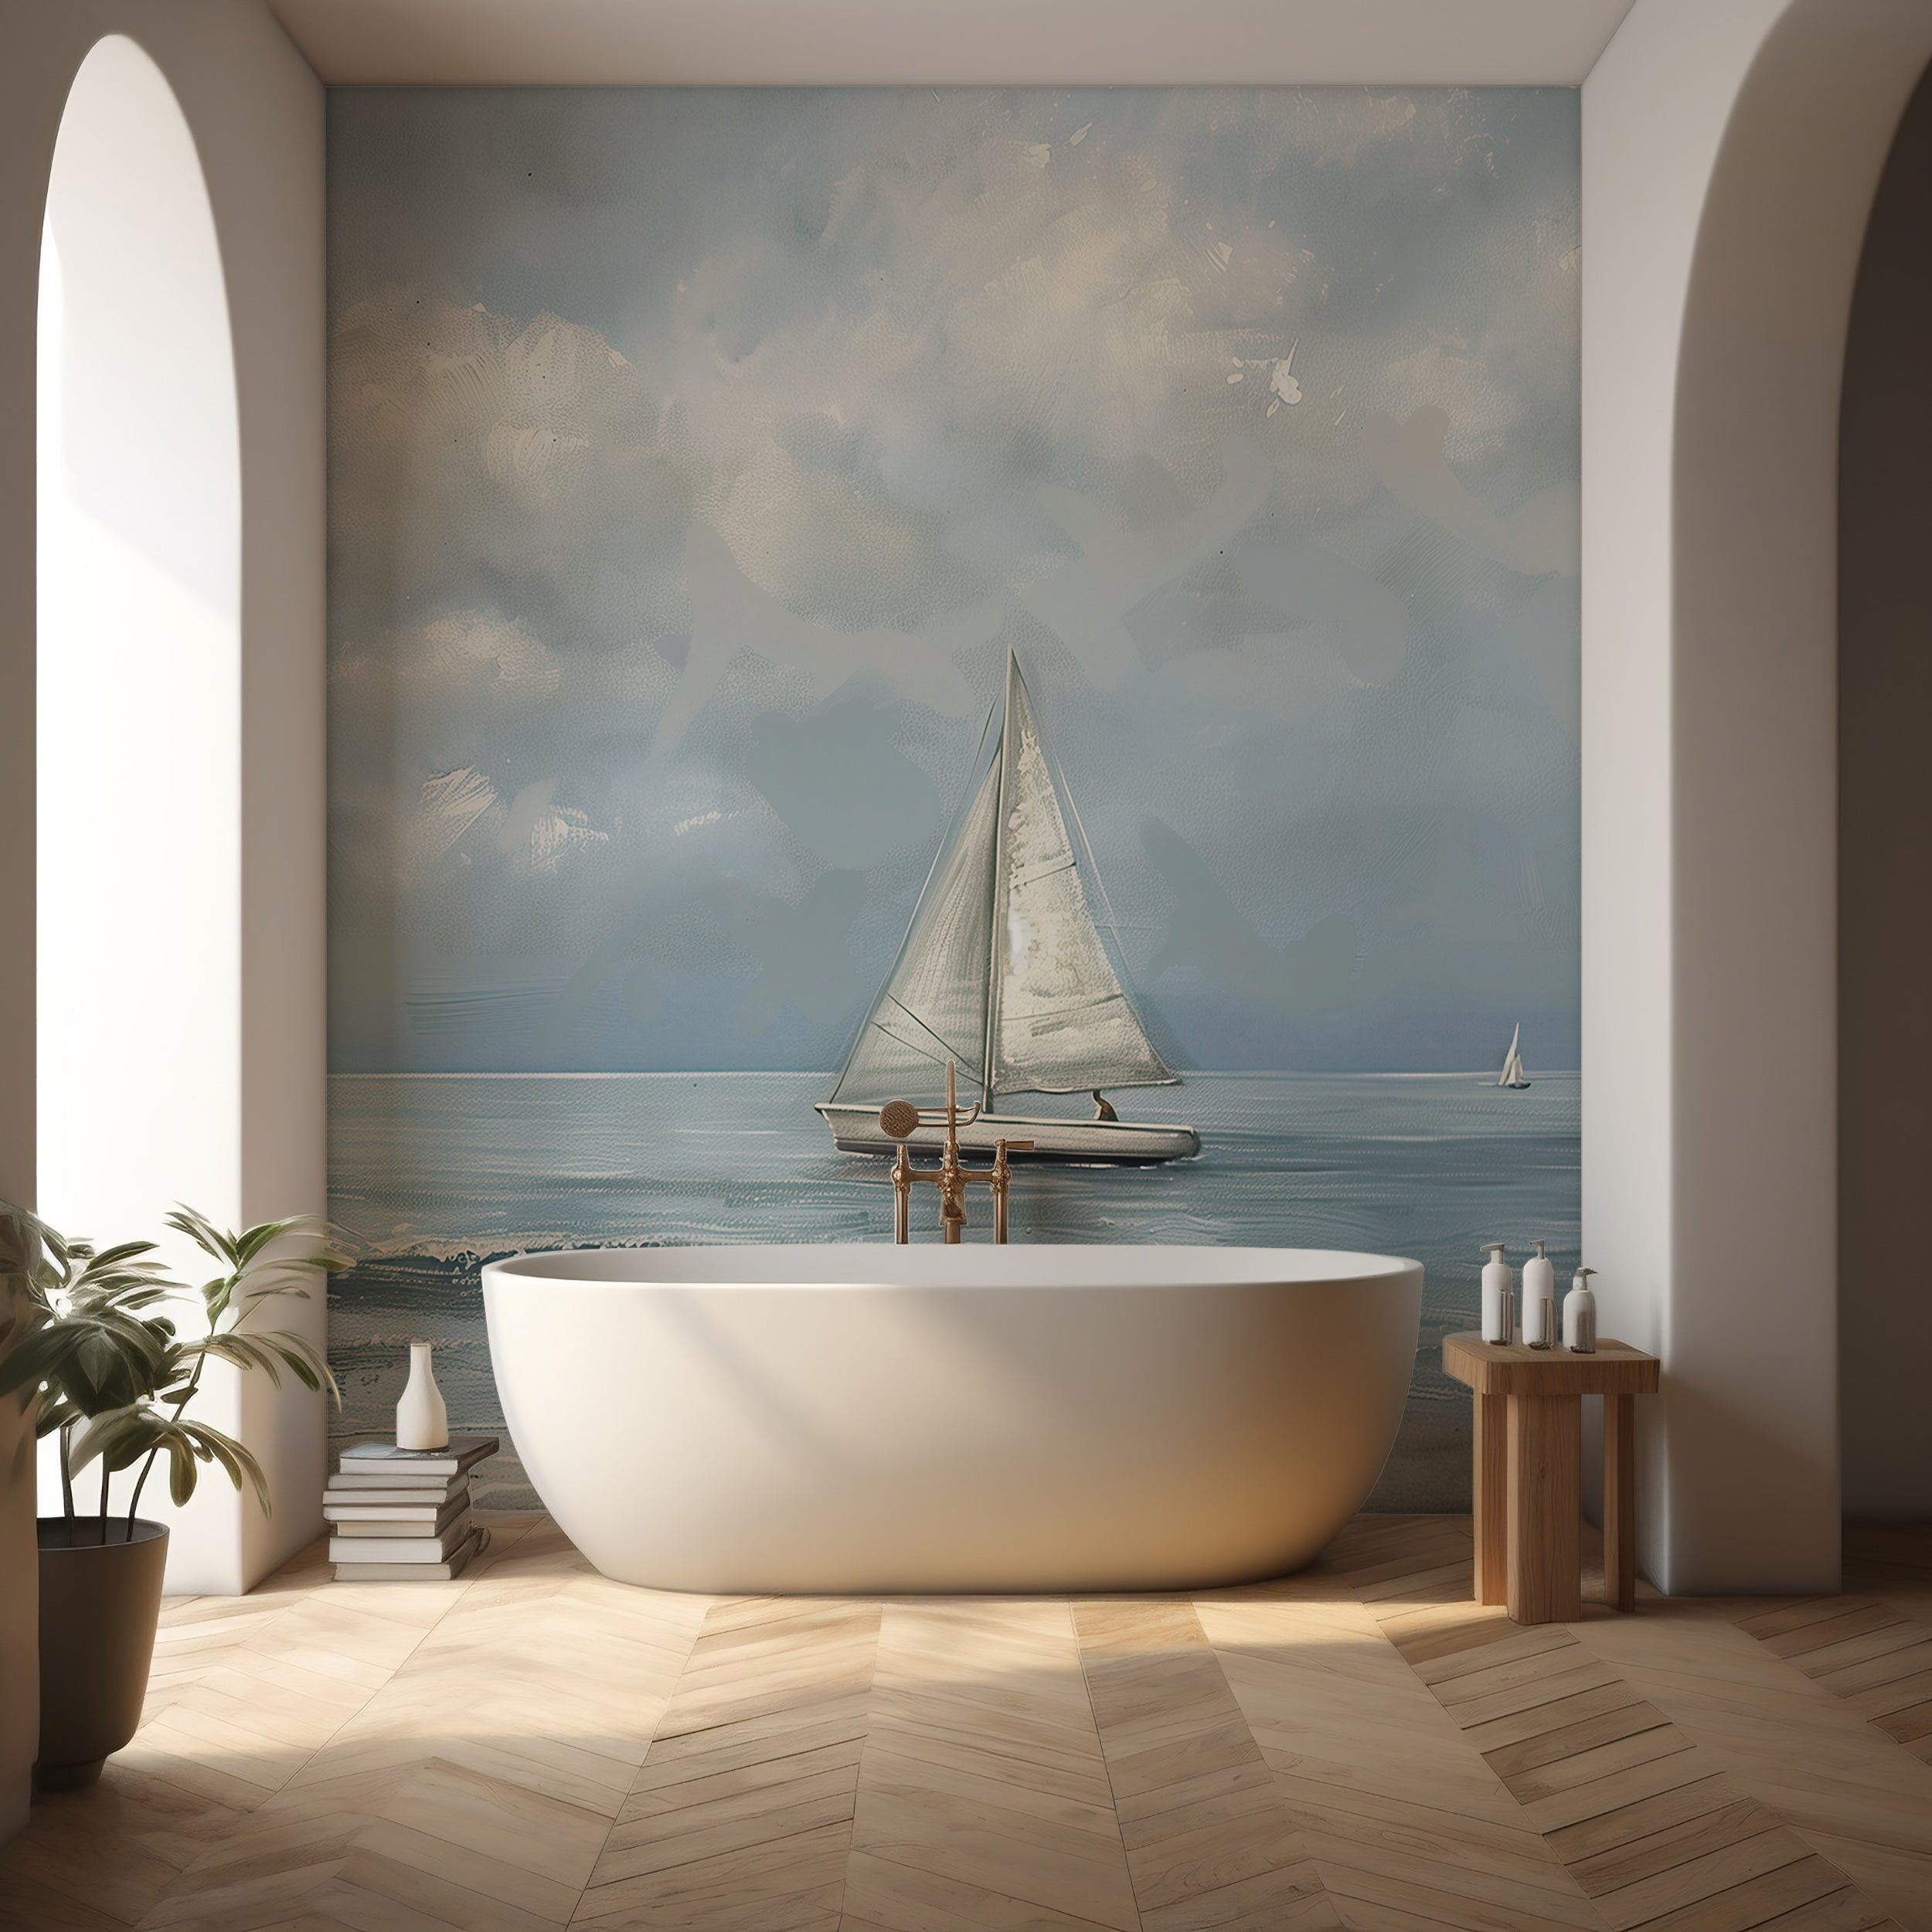 Peel and stick sailboat ocean mural Removable cloudy ocean wall decor